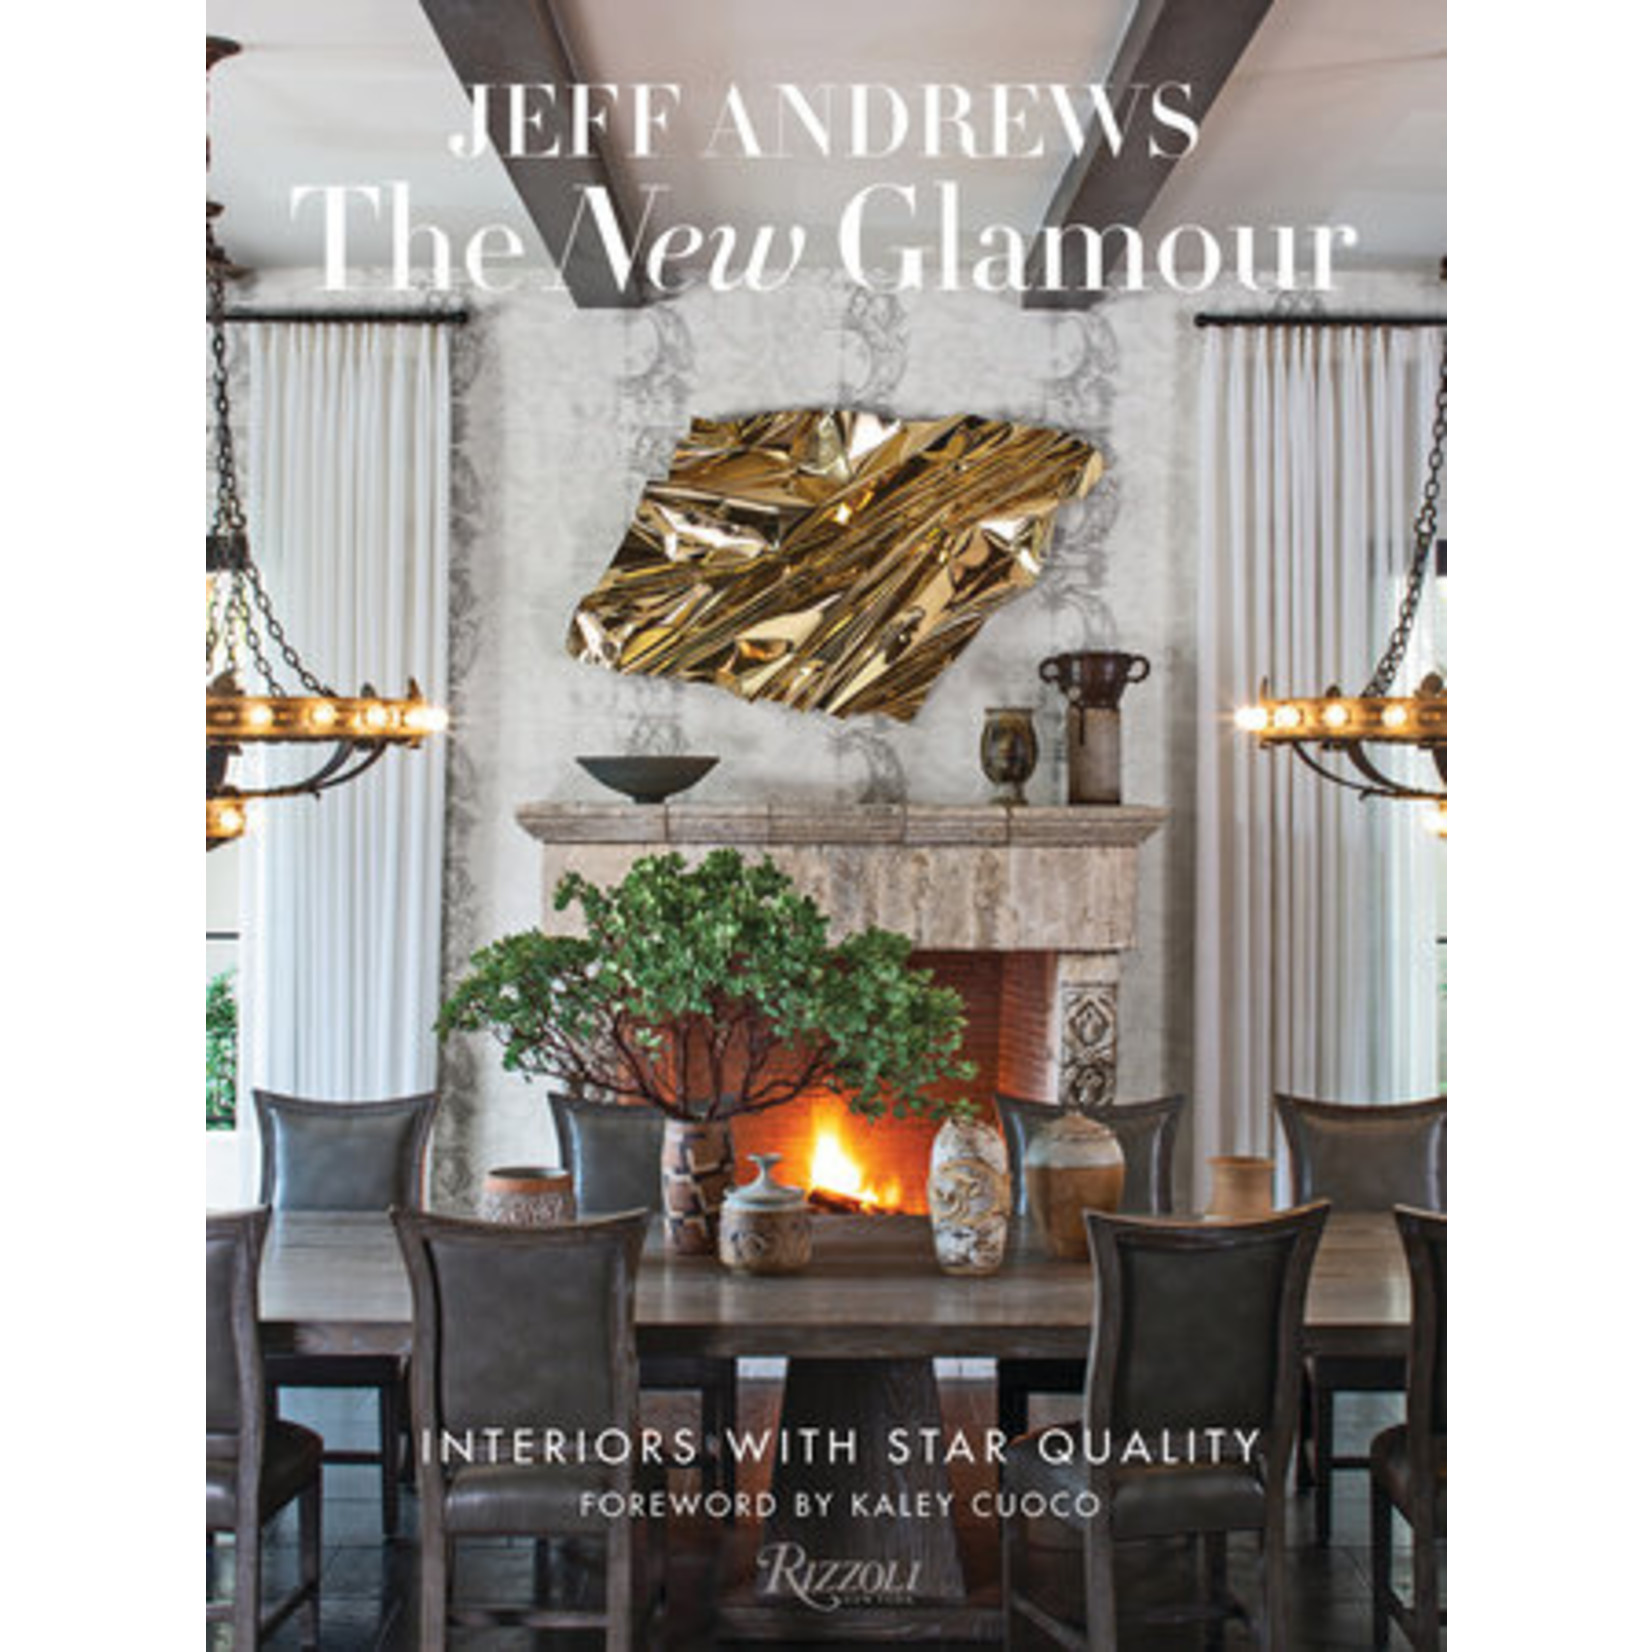 Penguin Random House New Glamour: Interiors With Star Quality